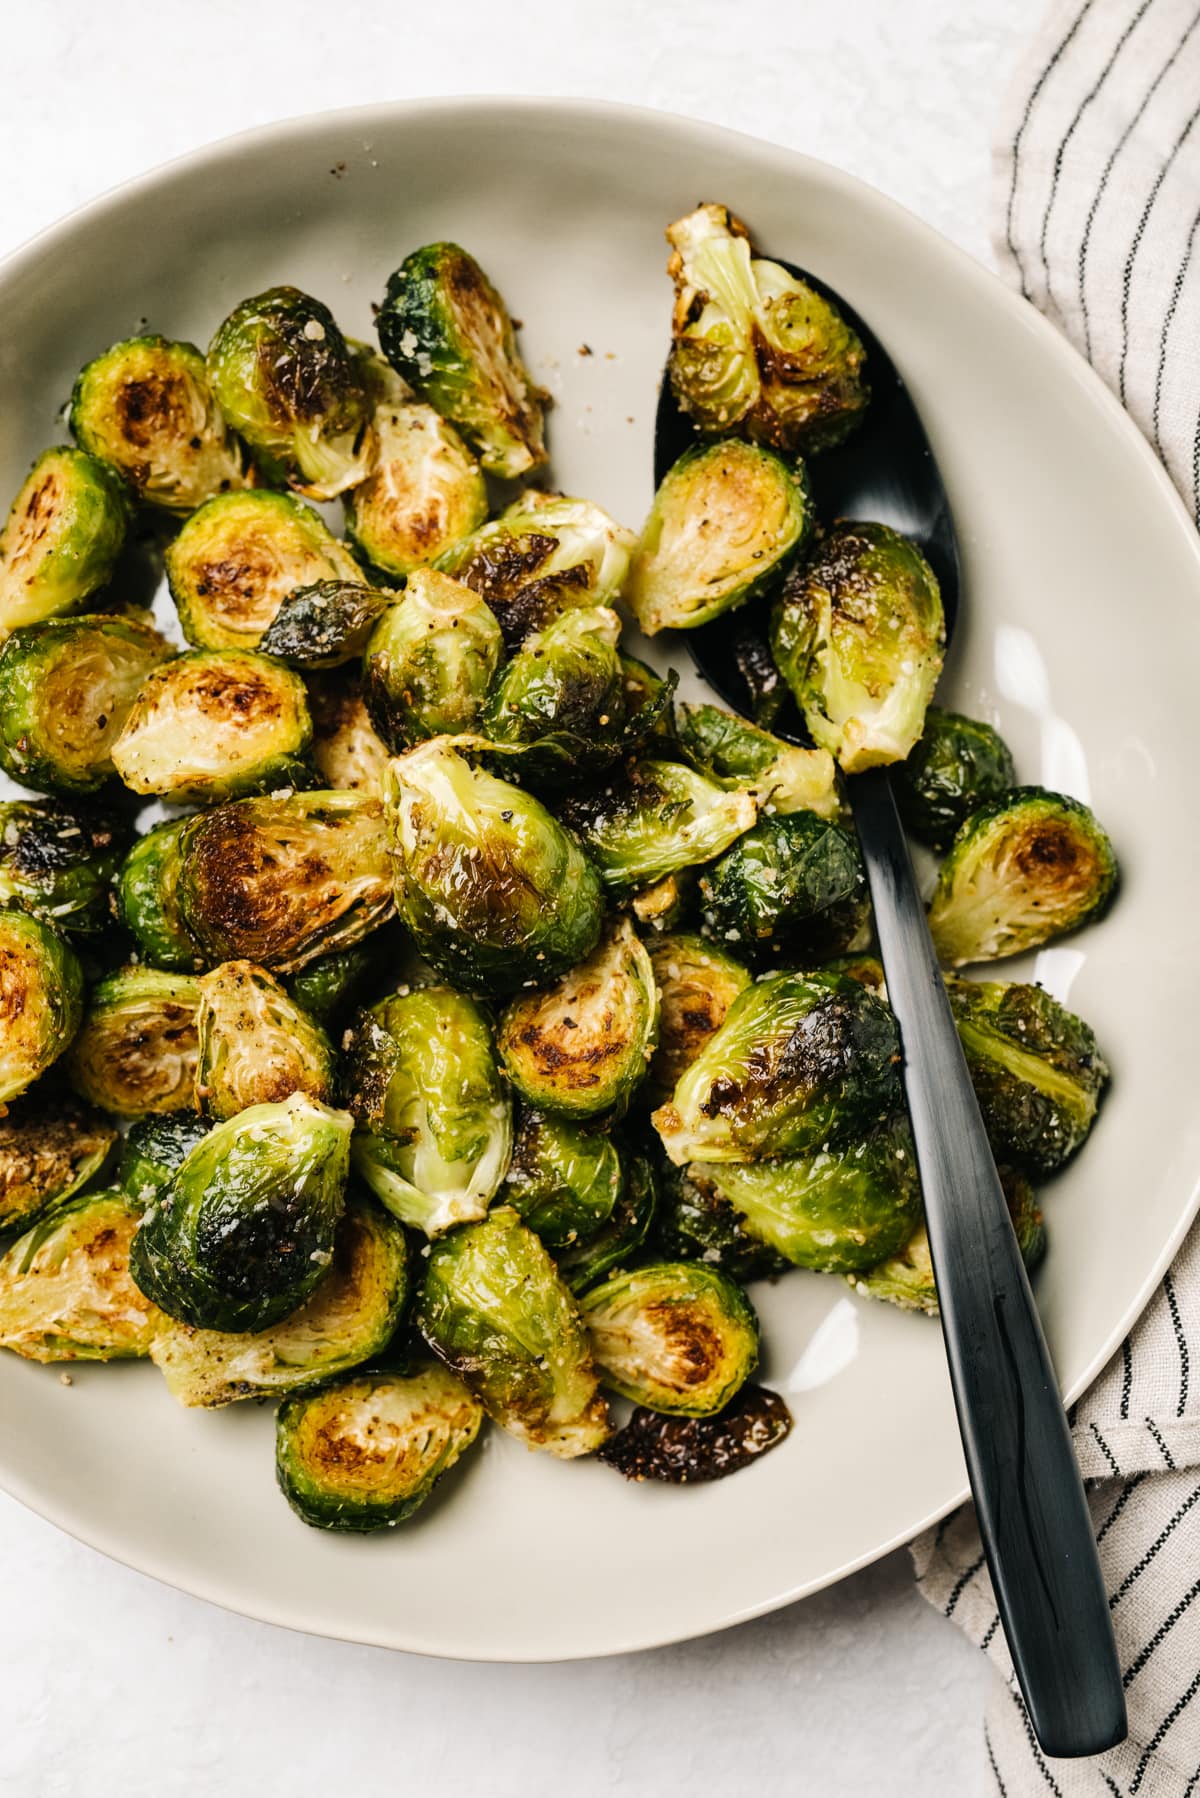 Roasted Brussels sprouts in a low tan serving bowl with a black serving spoon; a striped linen napkin is to the side, partially tucked under the bowl.